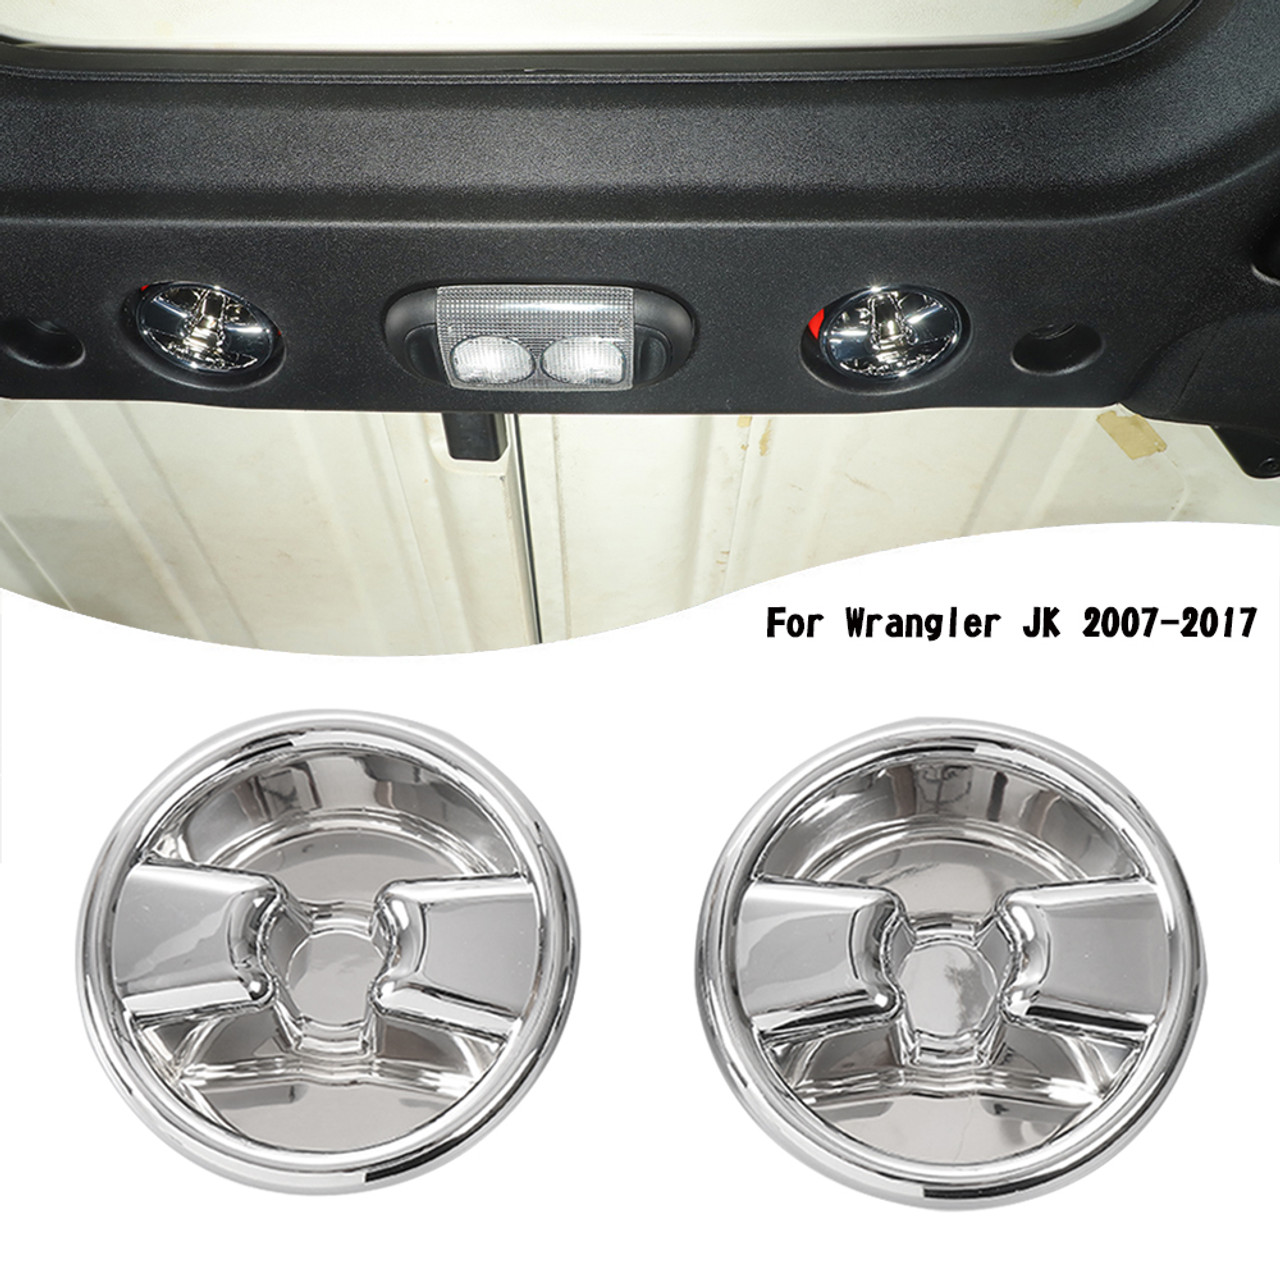 Top Roof Switch Knob Screw Cover Trim Accessories Fit for JEEP Wrangler JK 2007-2017